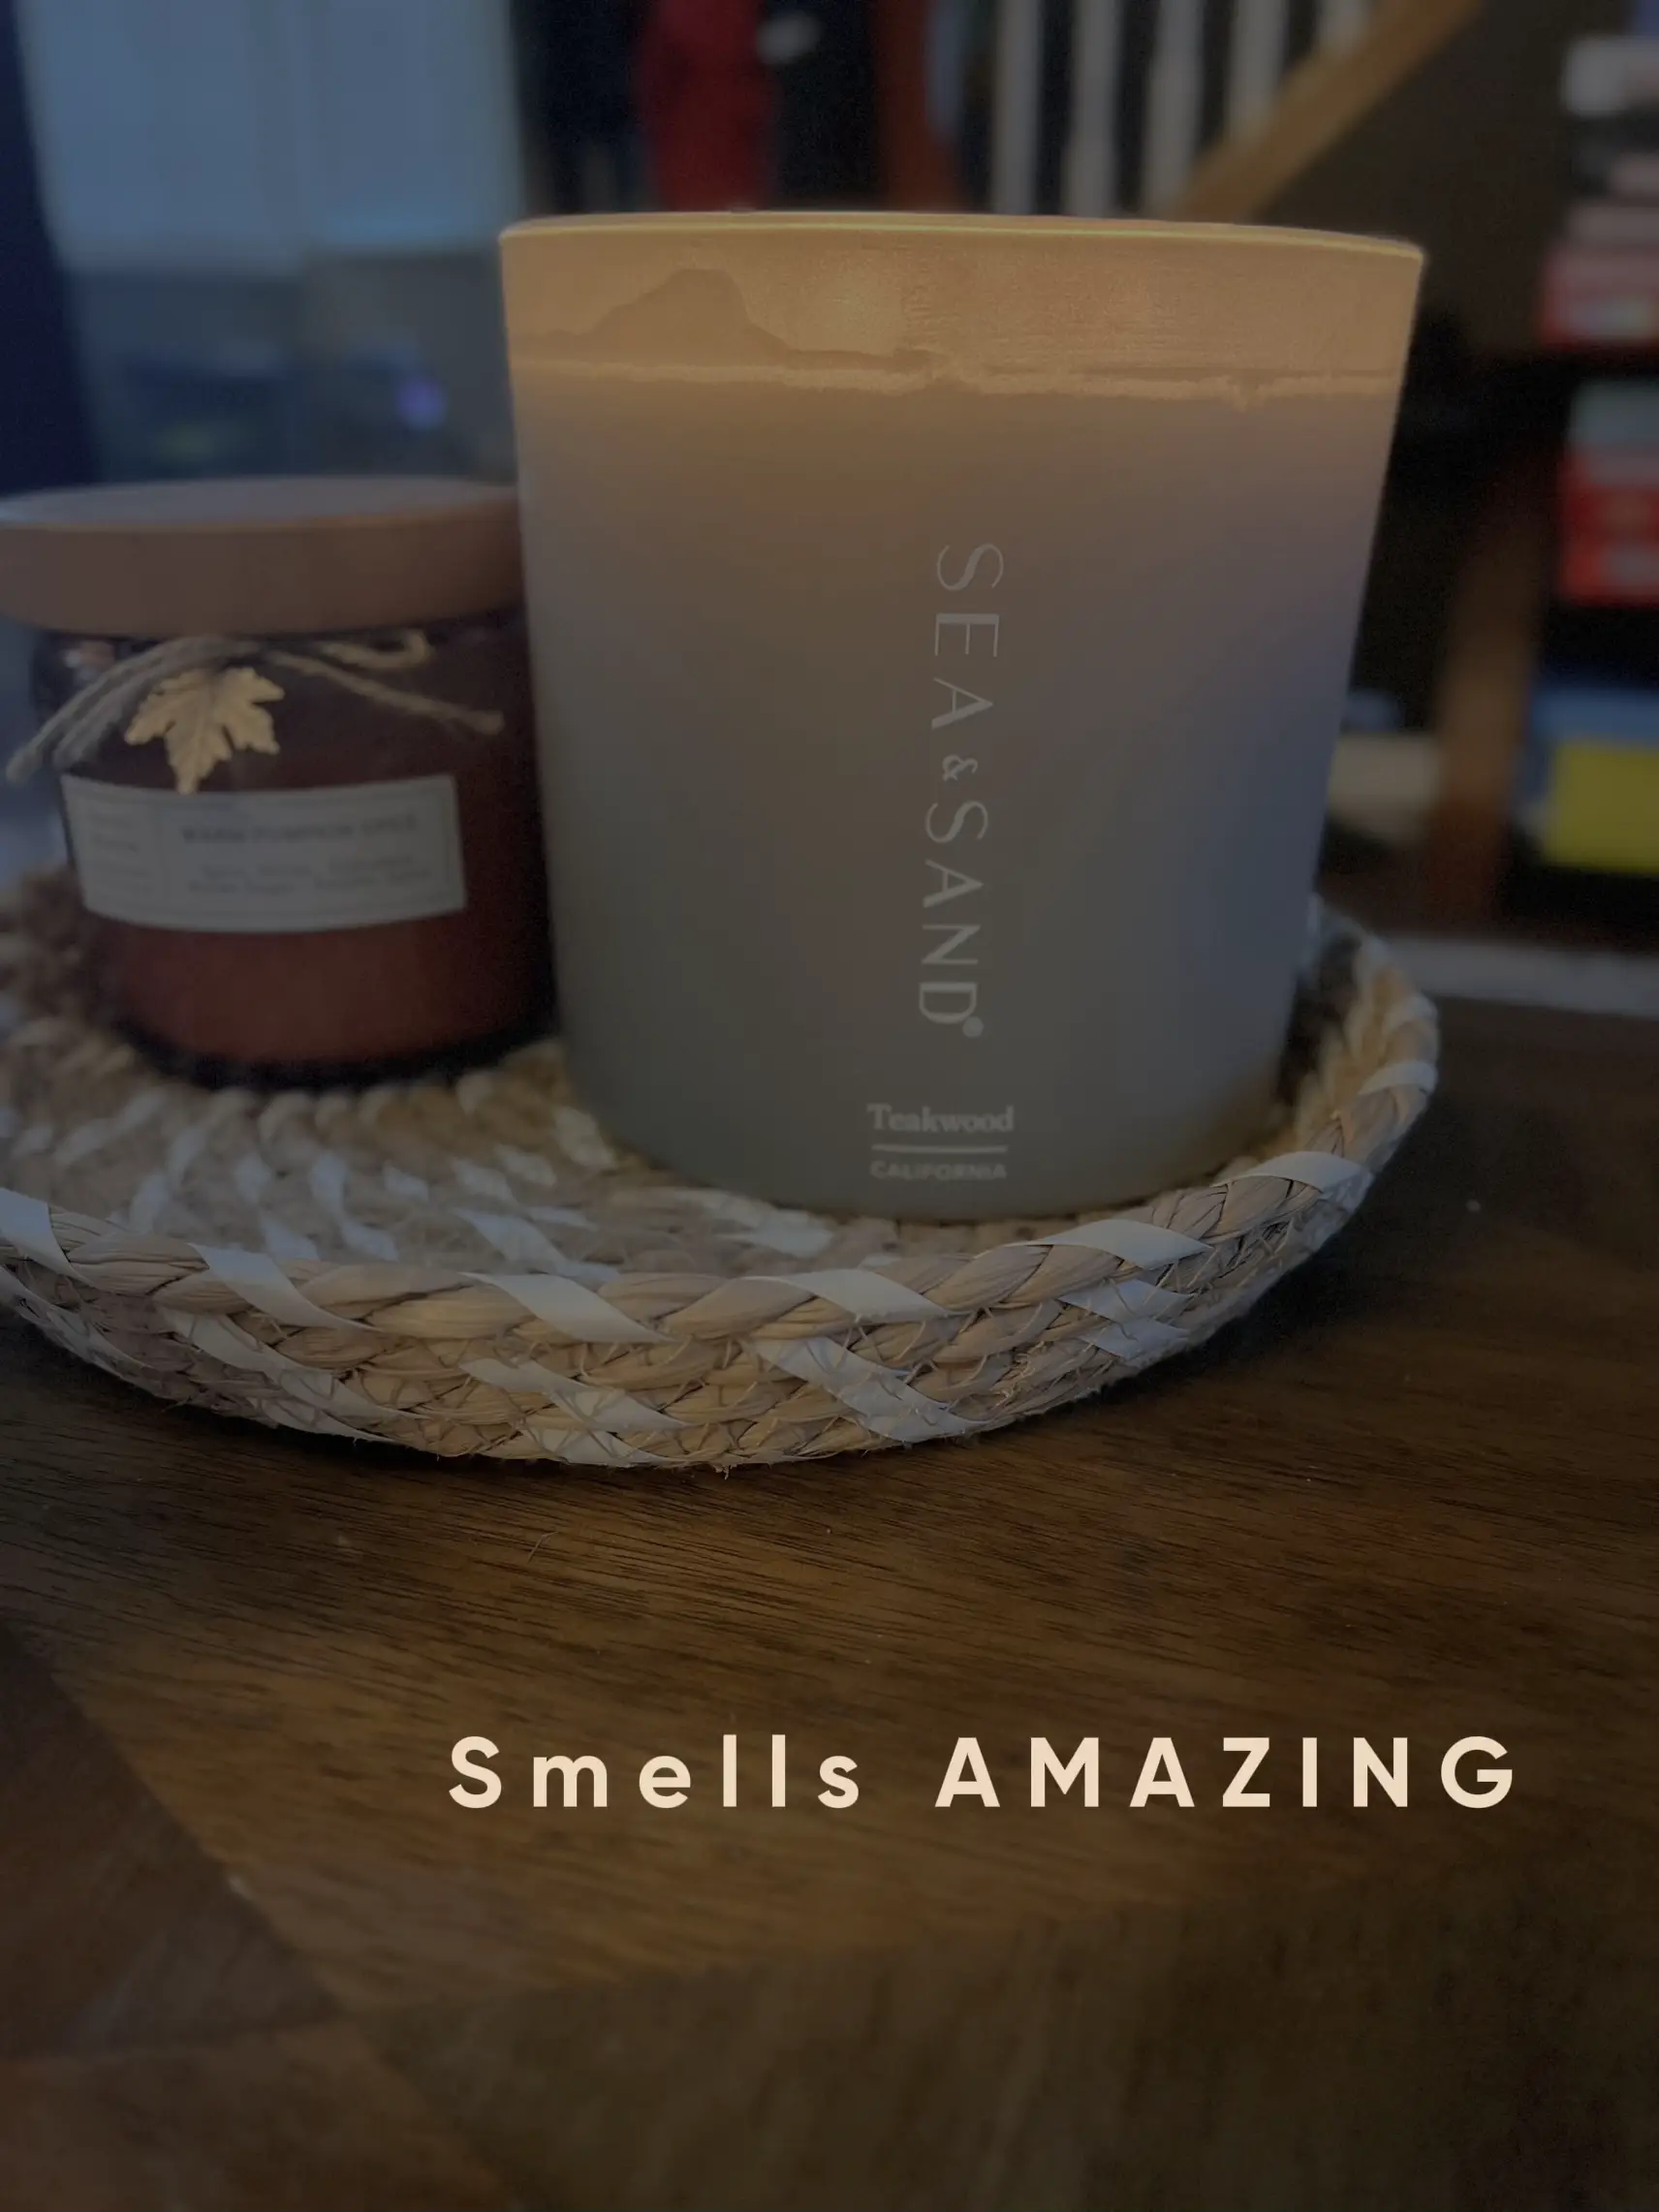 Has anyone tried the new Sea & Sand Teakwood candle at Costco ? Any  thoughts ? : r/Costco